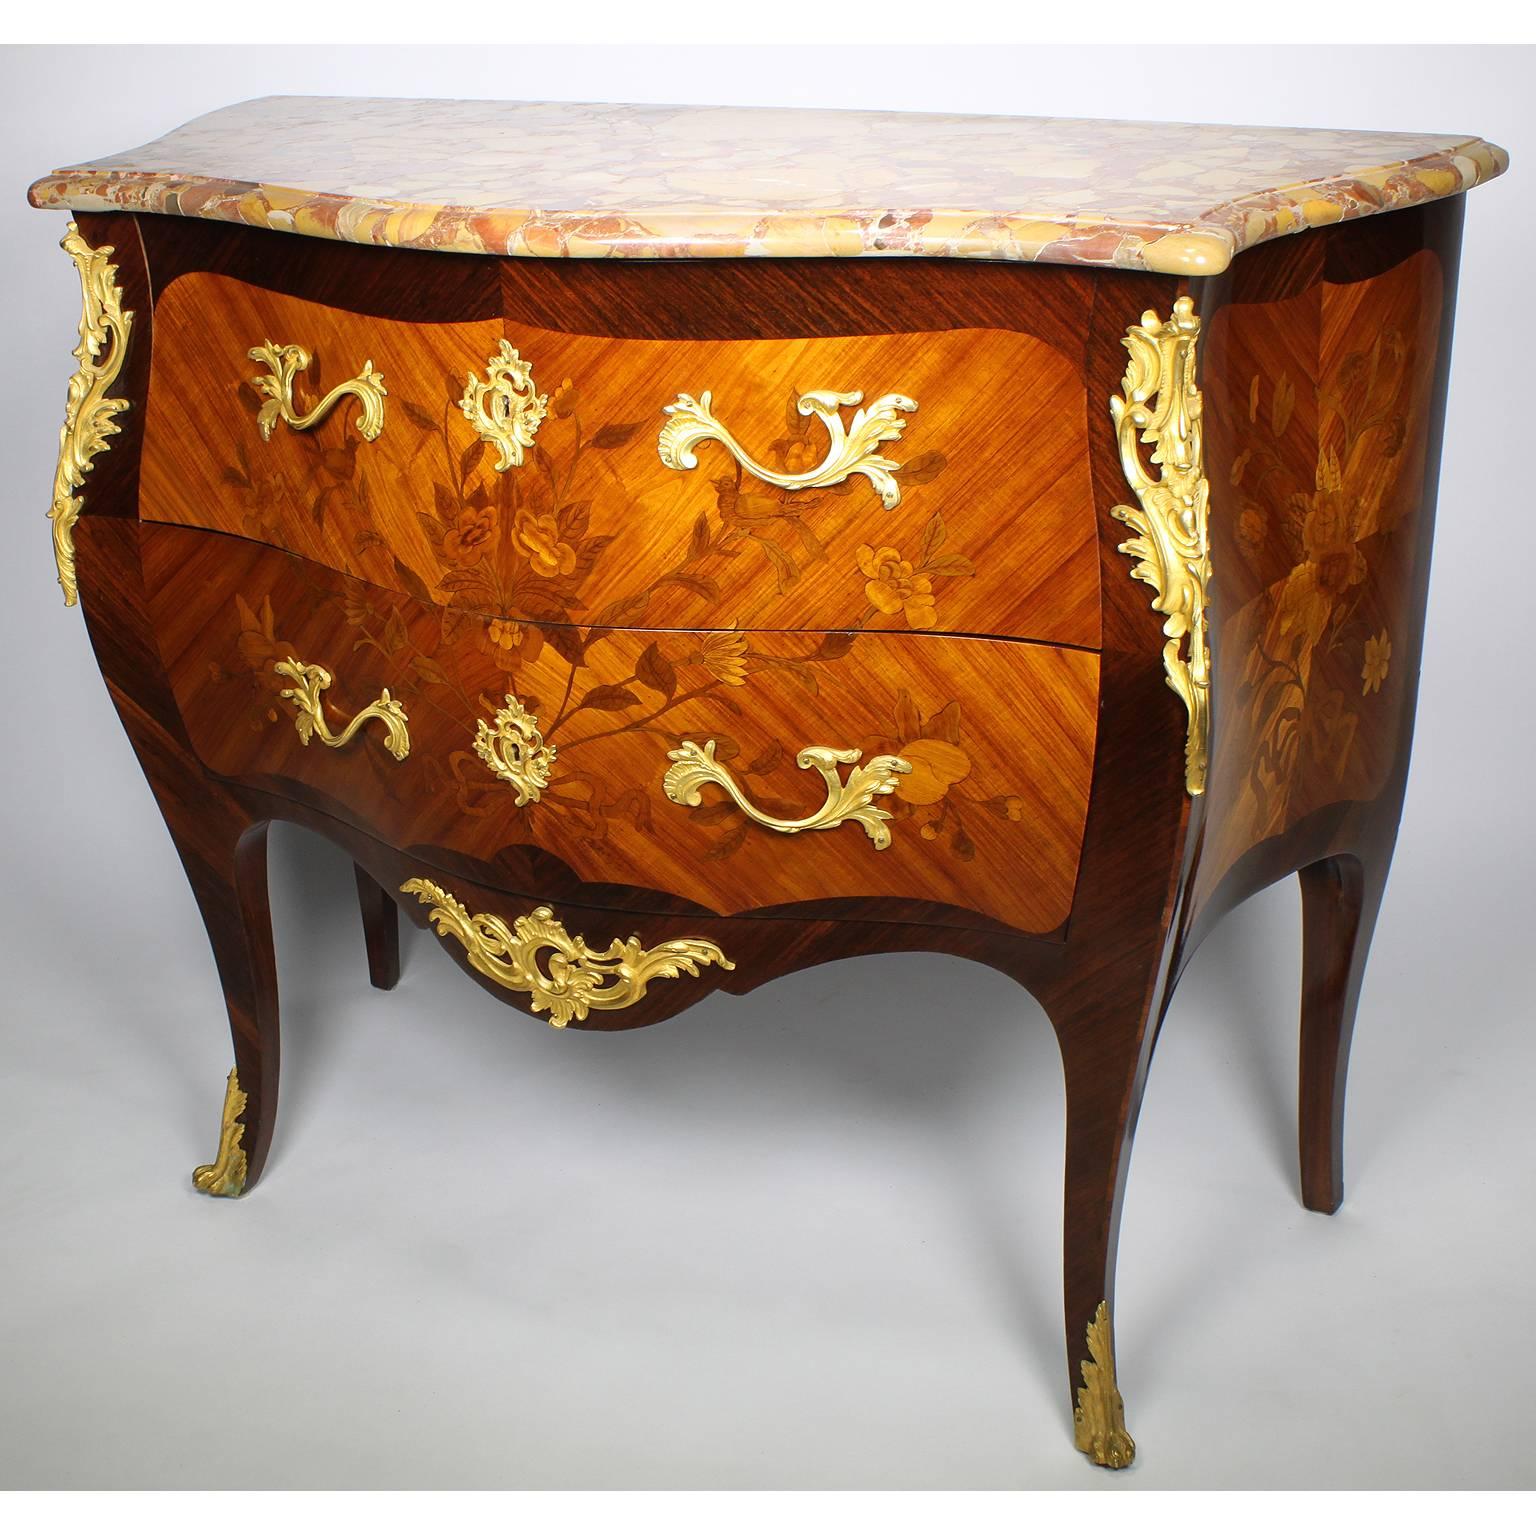 A fine French 19th-20th century Louis XV style tulipwood floral marquetry and gilt bronze mounted two drawer bombé petit commode. The serpentine shaped commode with two front drawers, each with a pair of scrolled floral ormolu handles and a